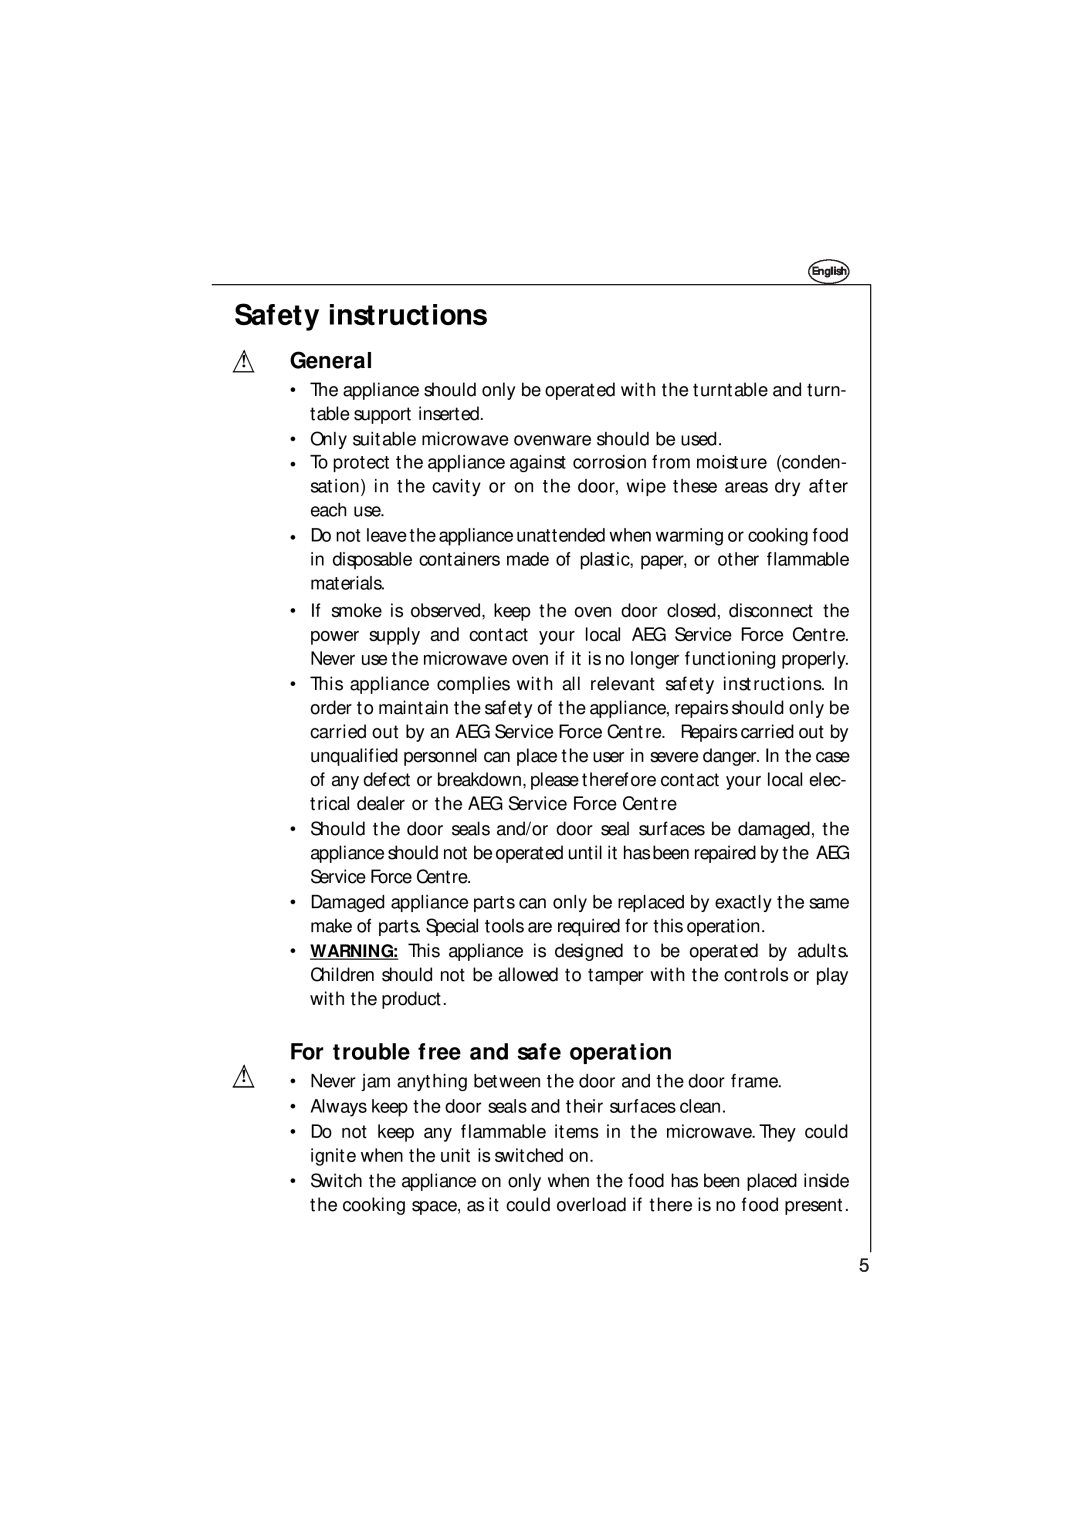 AEG 153 E manual Safety instructions, General, For trouble free and safe operation 